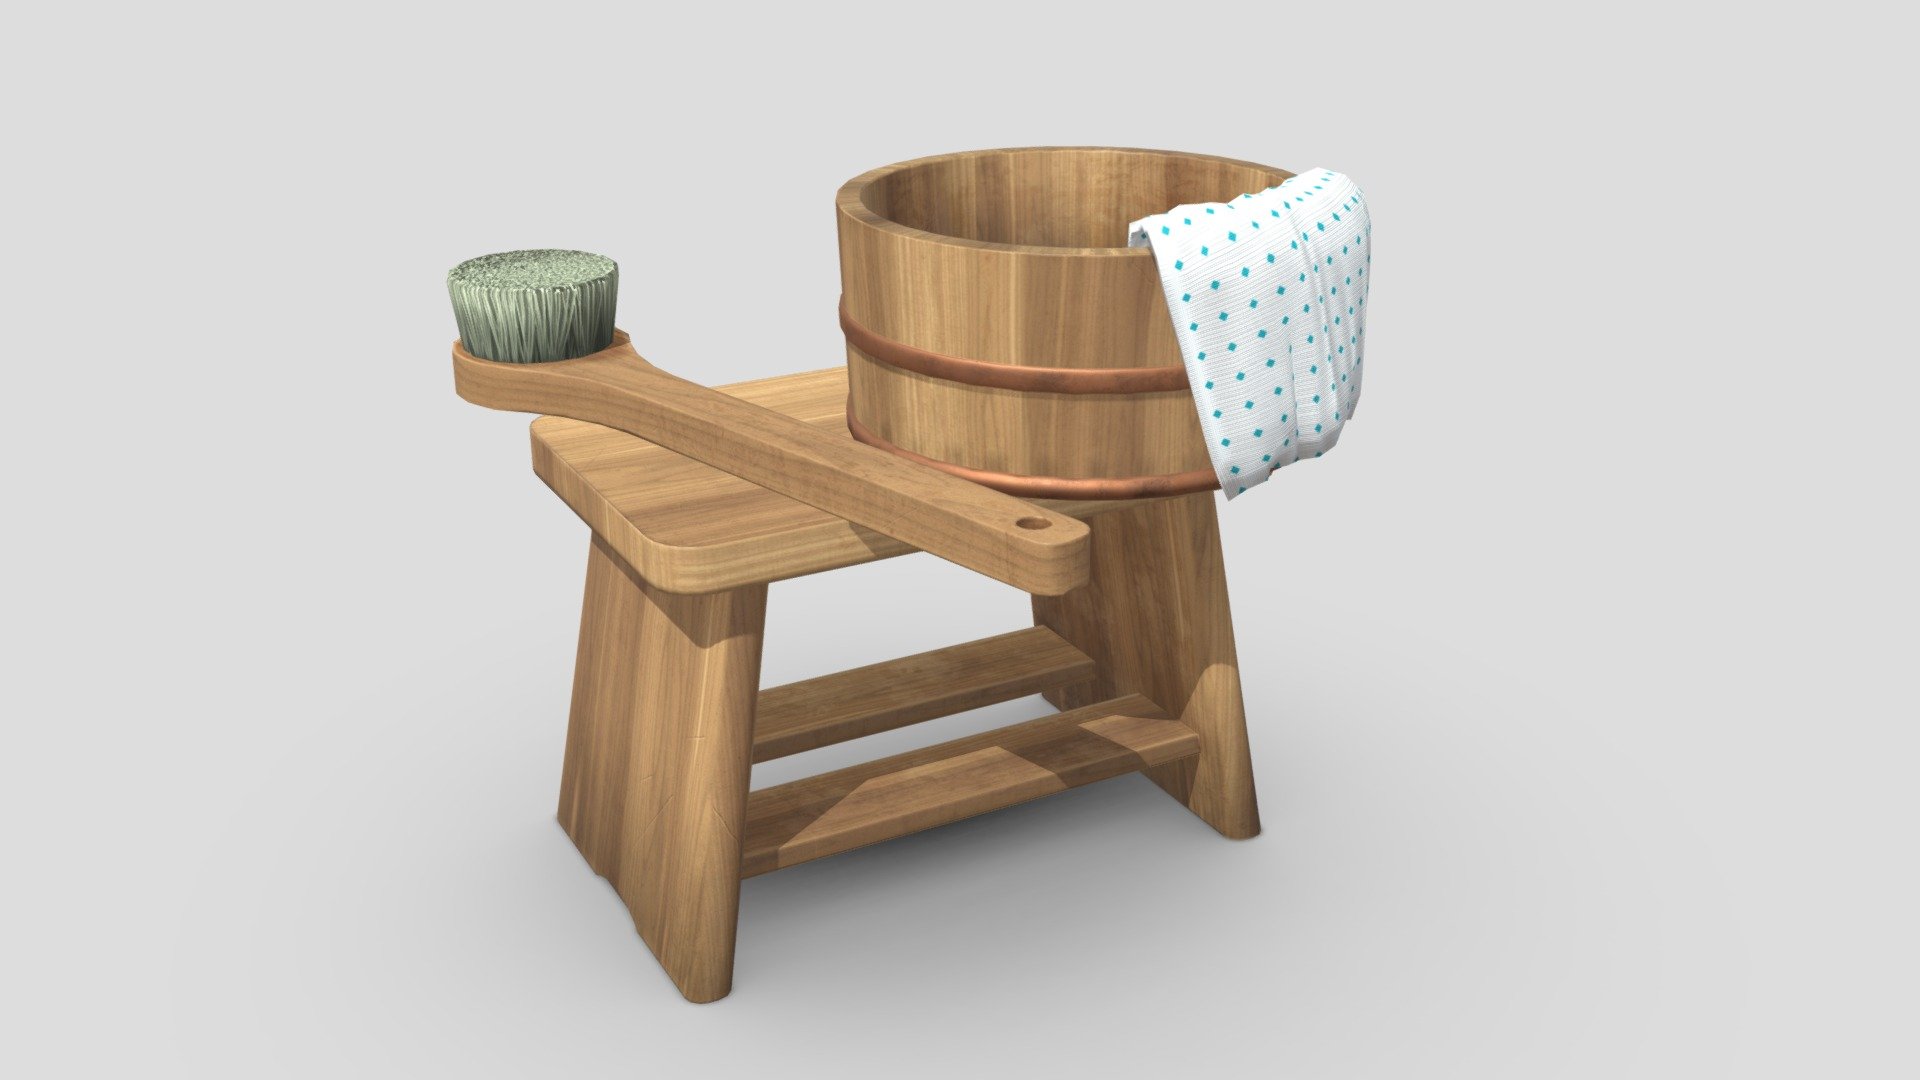 Stool and bucket made of Hinoki wood, for a relaxing time at a Japanese &ldquo;onsen